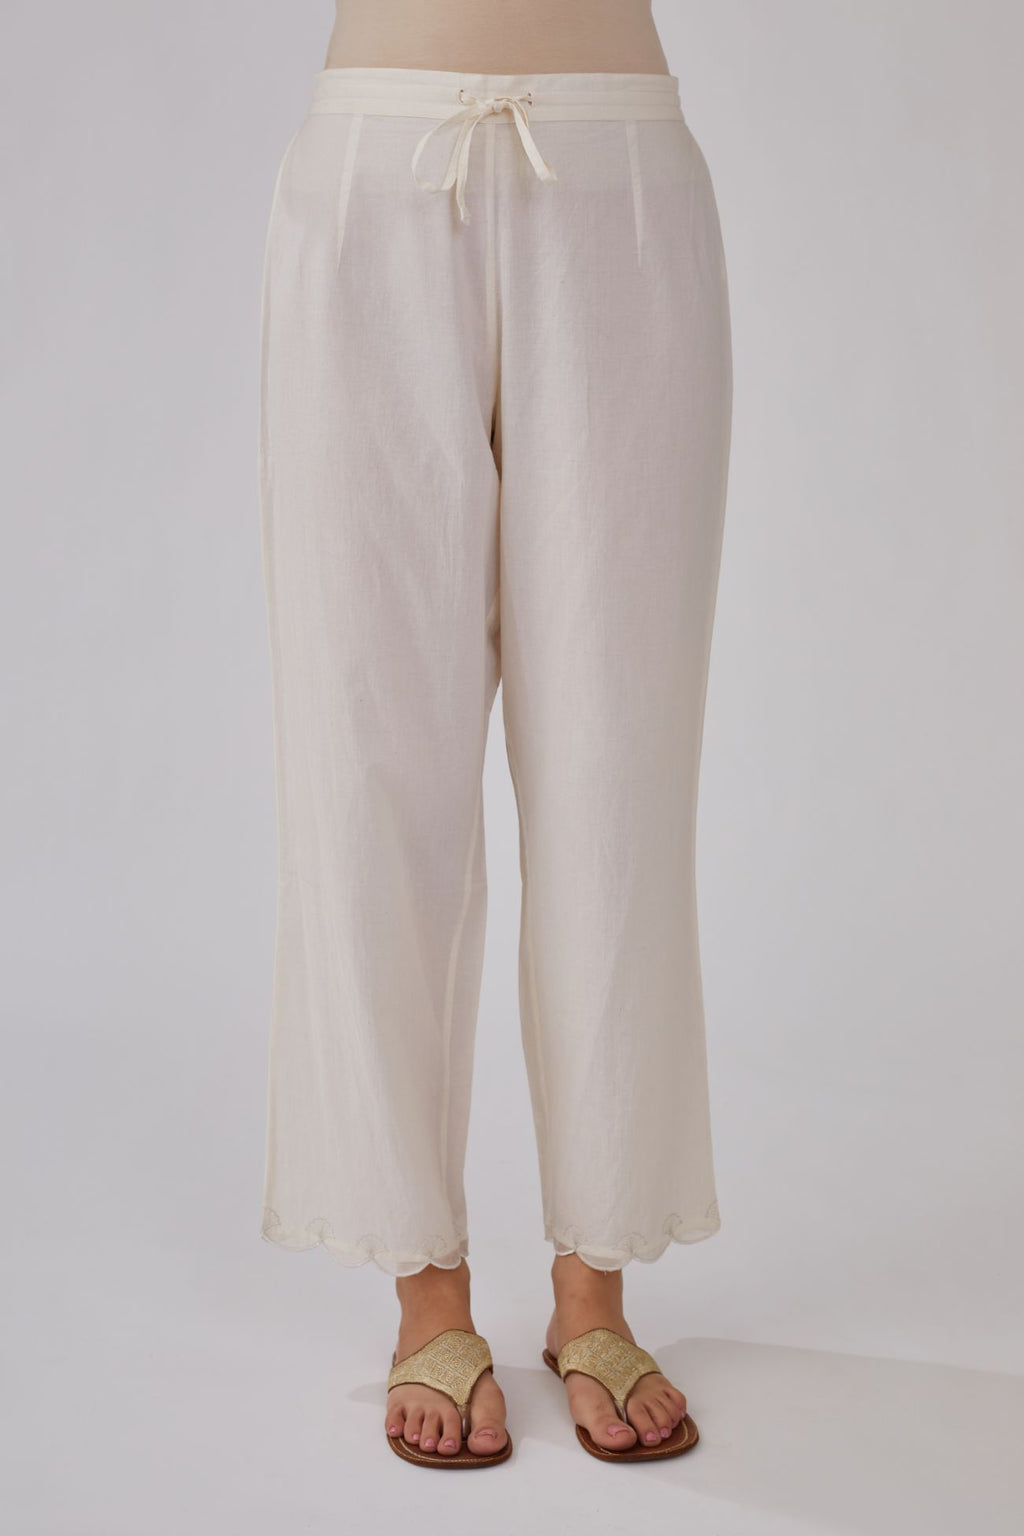 Peach hand embroidered pants